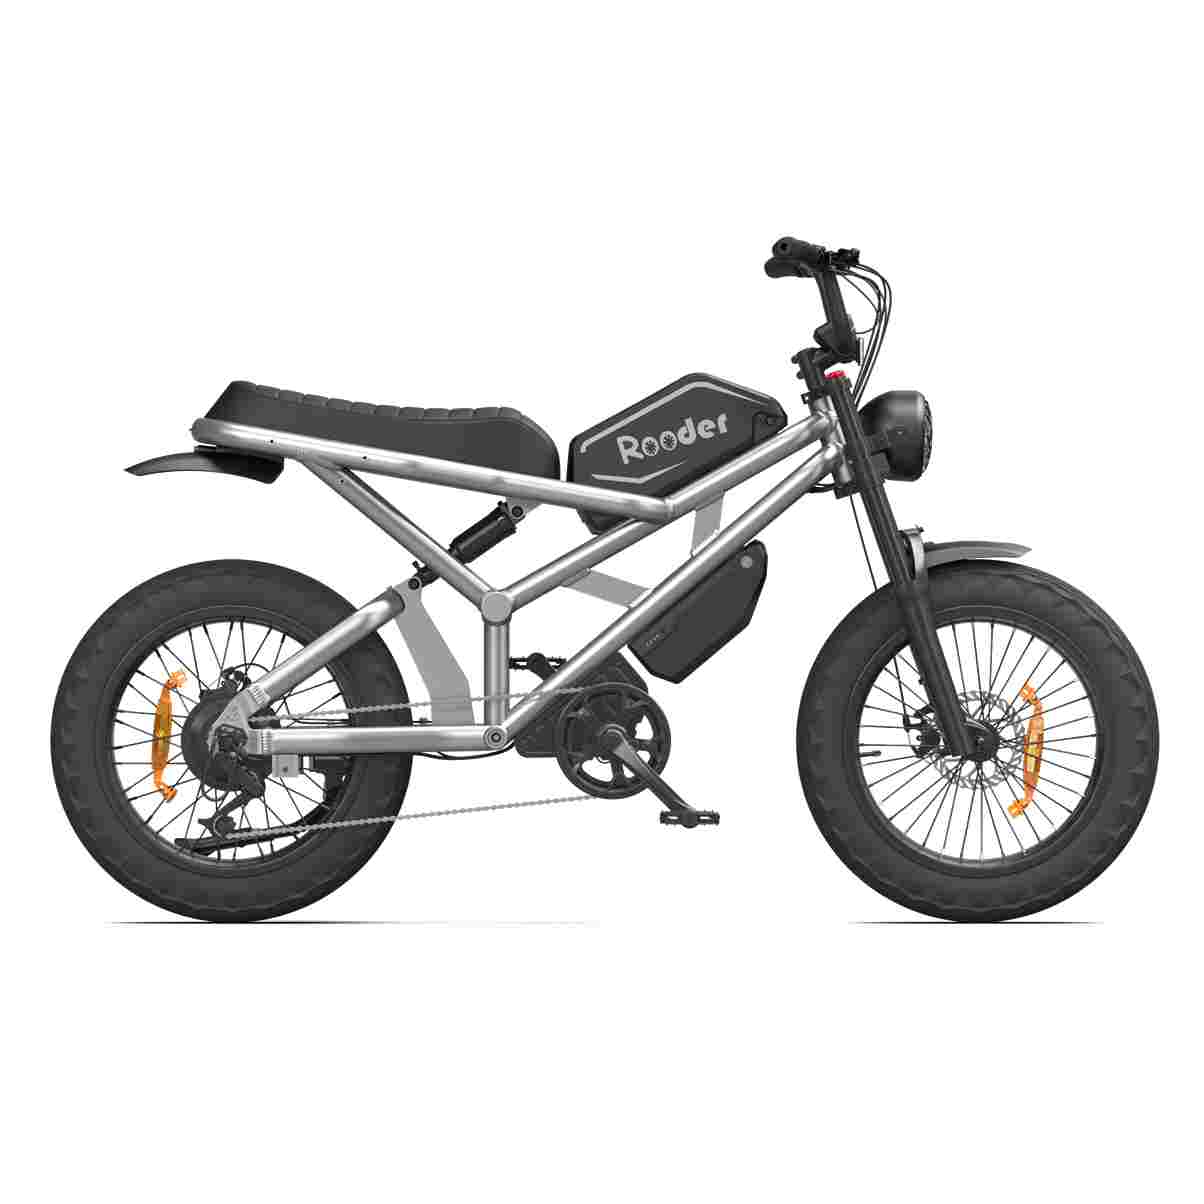 Adult Size Electric Dirt Bike wholesale price